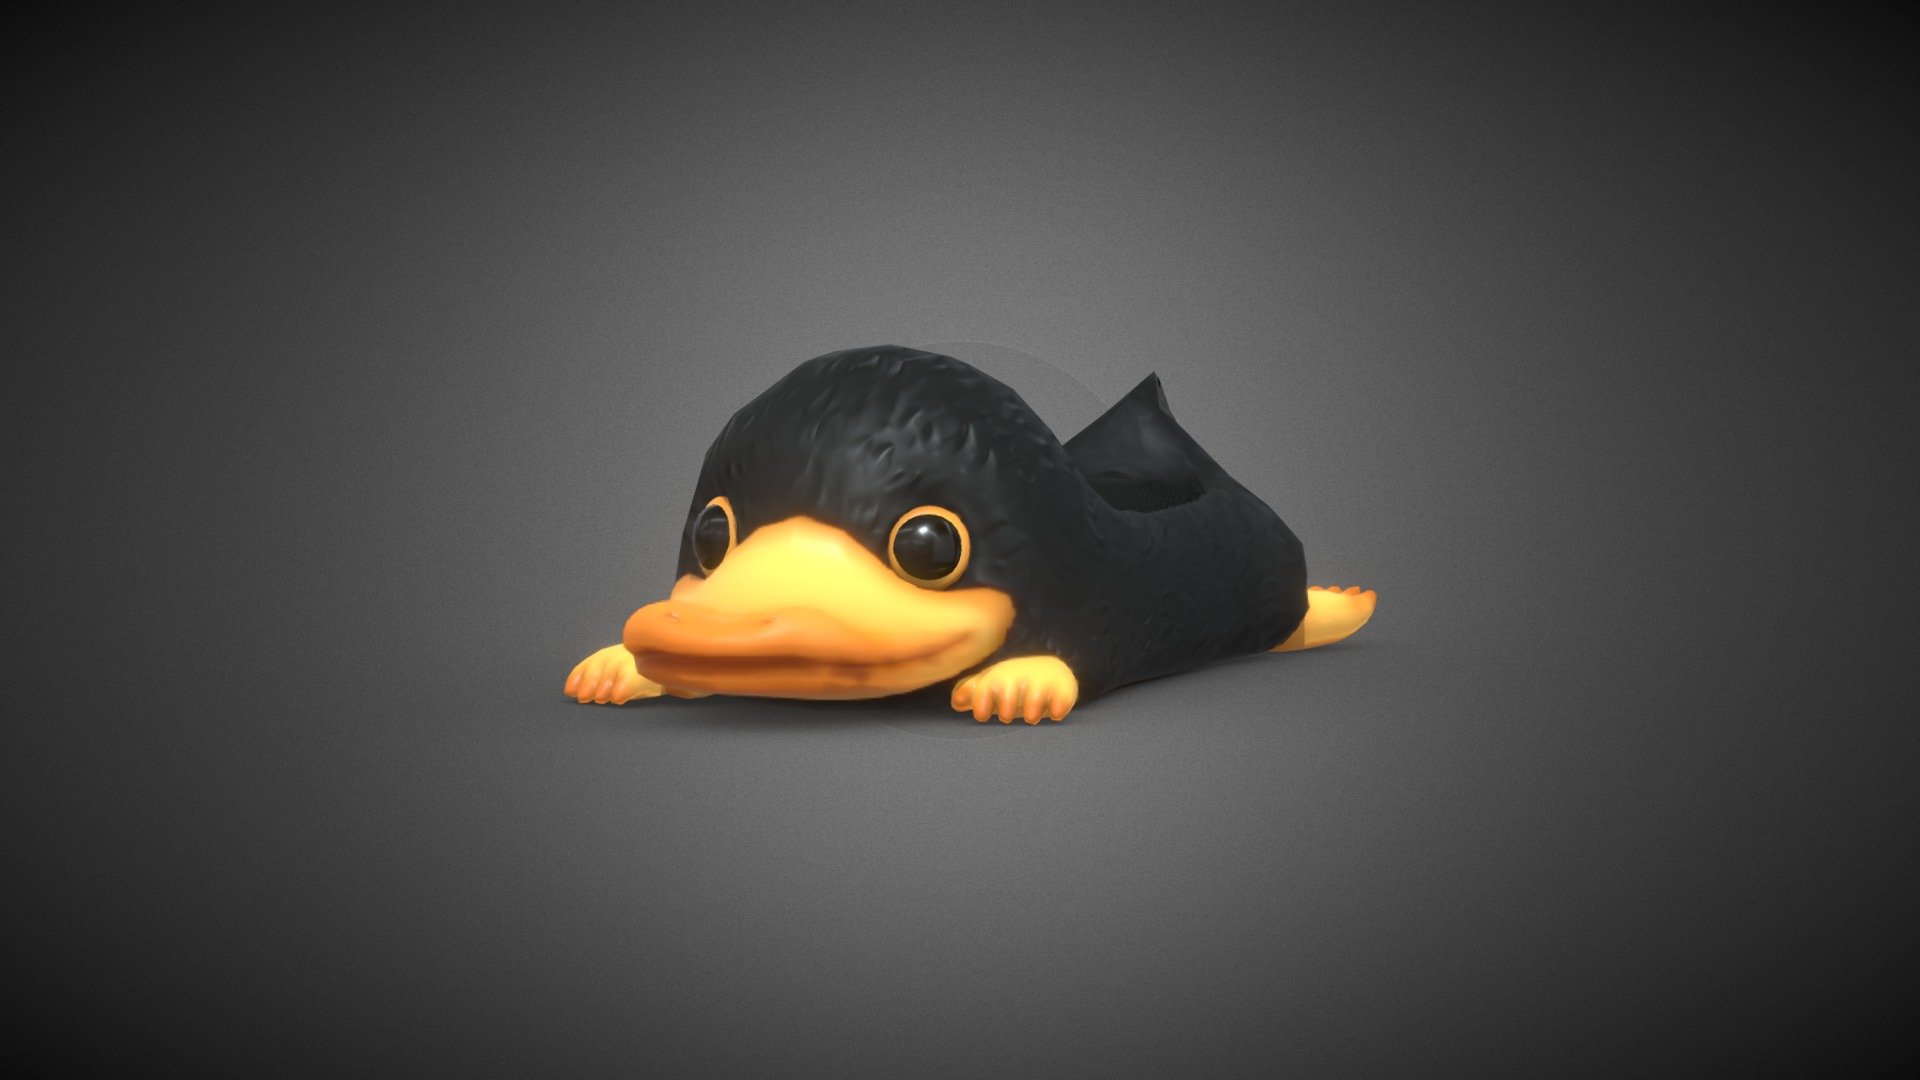 Niffler Slippers based on one of the event costume from the mobile game [Harry Potter: Hogwarts Mystery]

I just love it so much that I made one myself 3d model